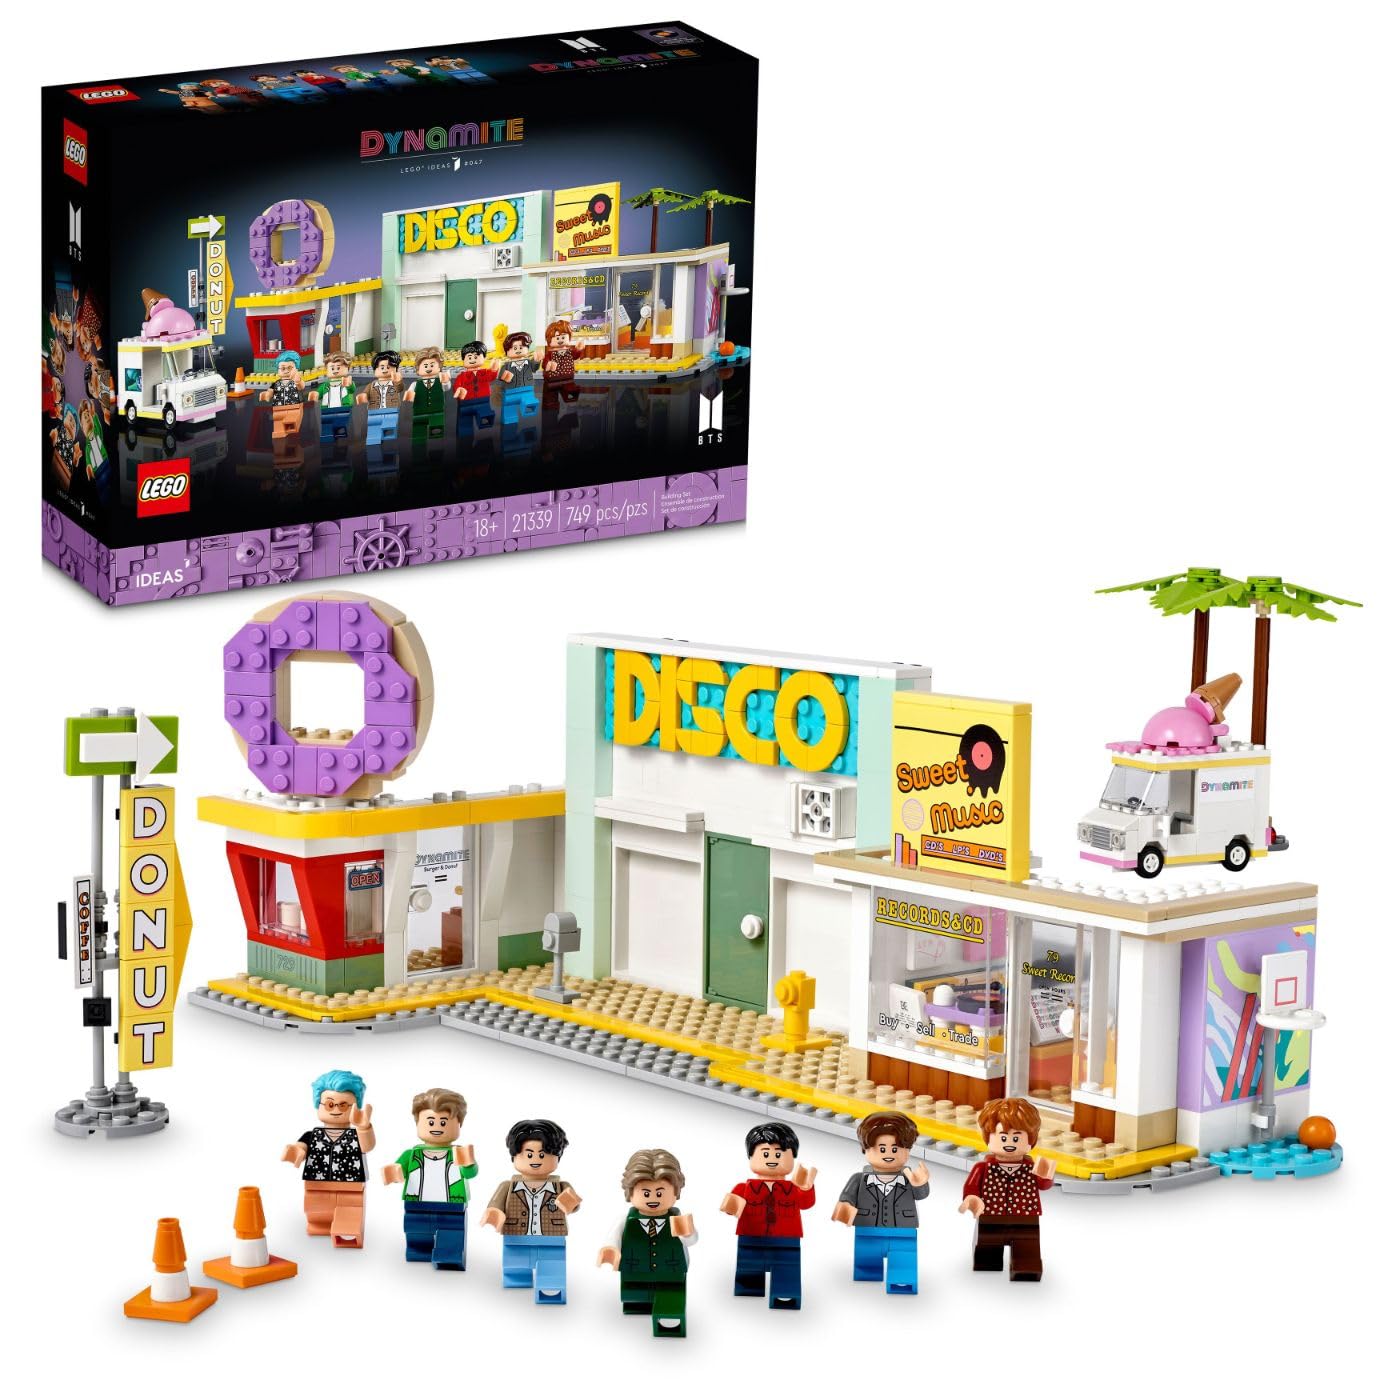 LEGO BTS Dynamite Set $54.60 (45% off) YMMV, May be targeted coupon